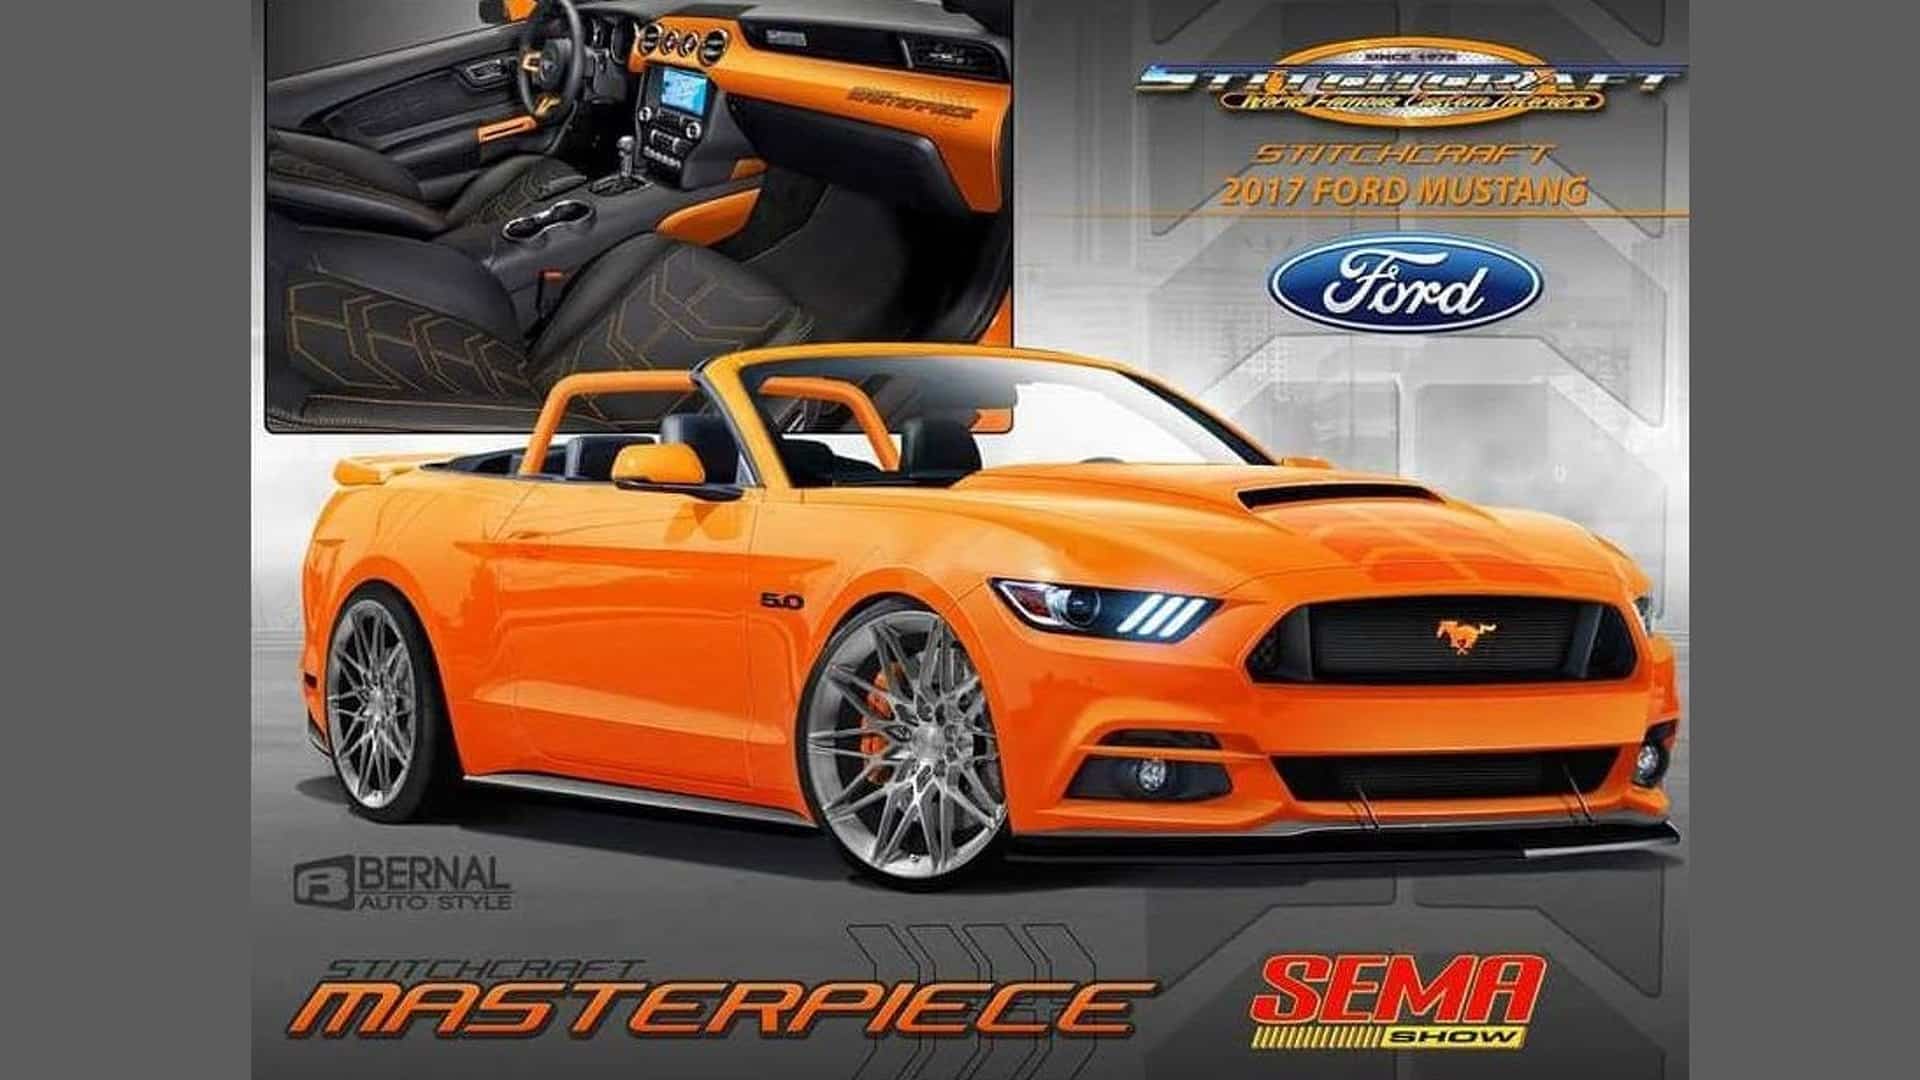 SEMA 2016 - 2017 Ford Mustang Convertible by Stitchcraft Interio